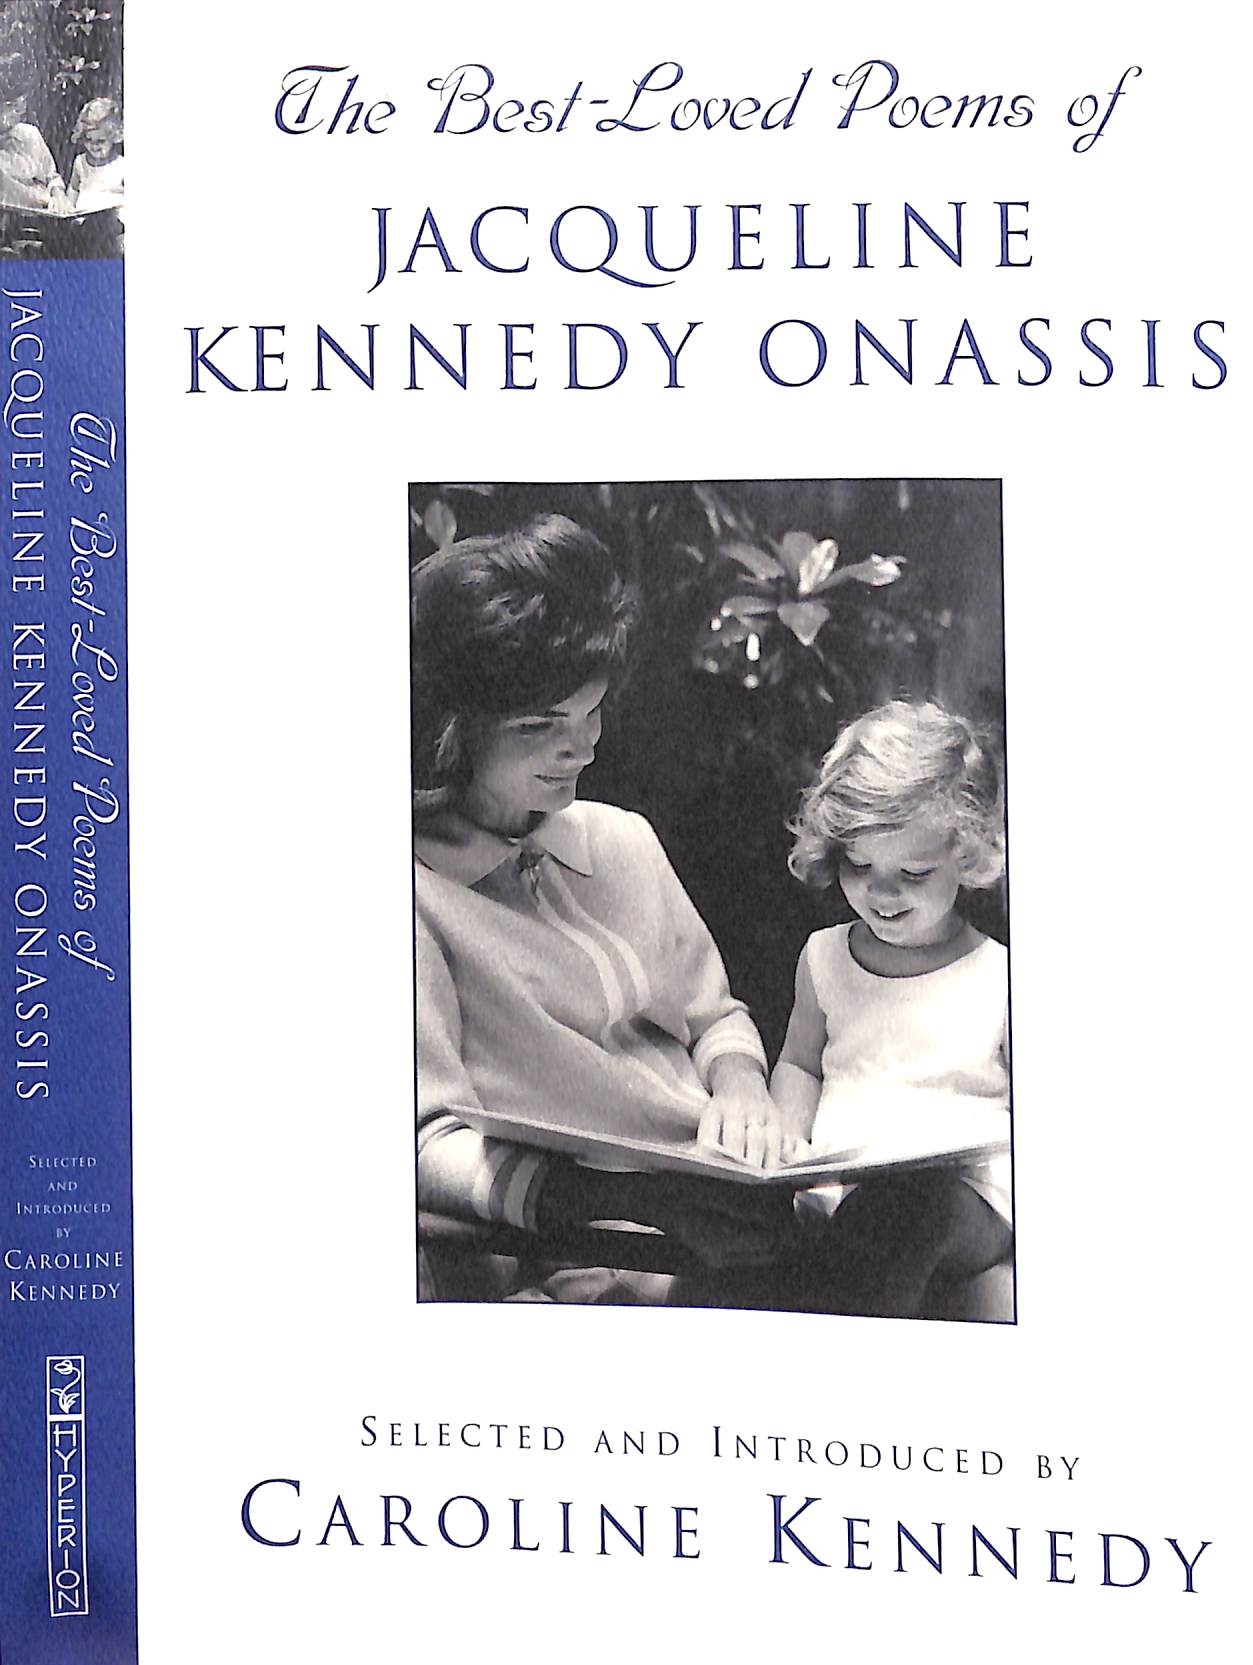 The Best-Loved Poems Of Jacqueline Kennedy Onassis by KENNEDY, Caroline ...